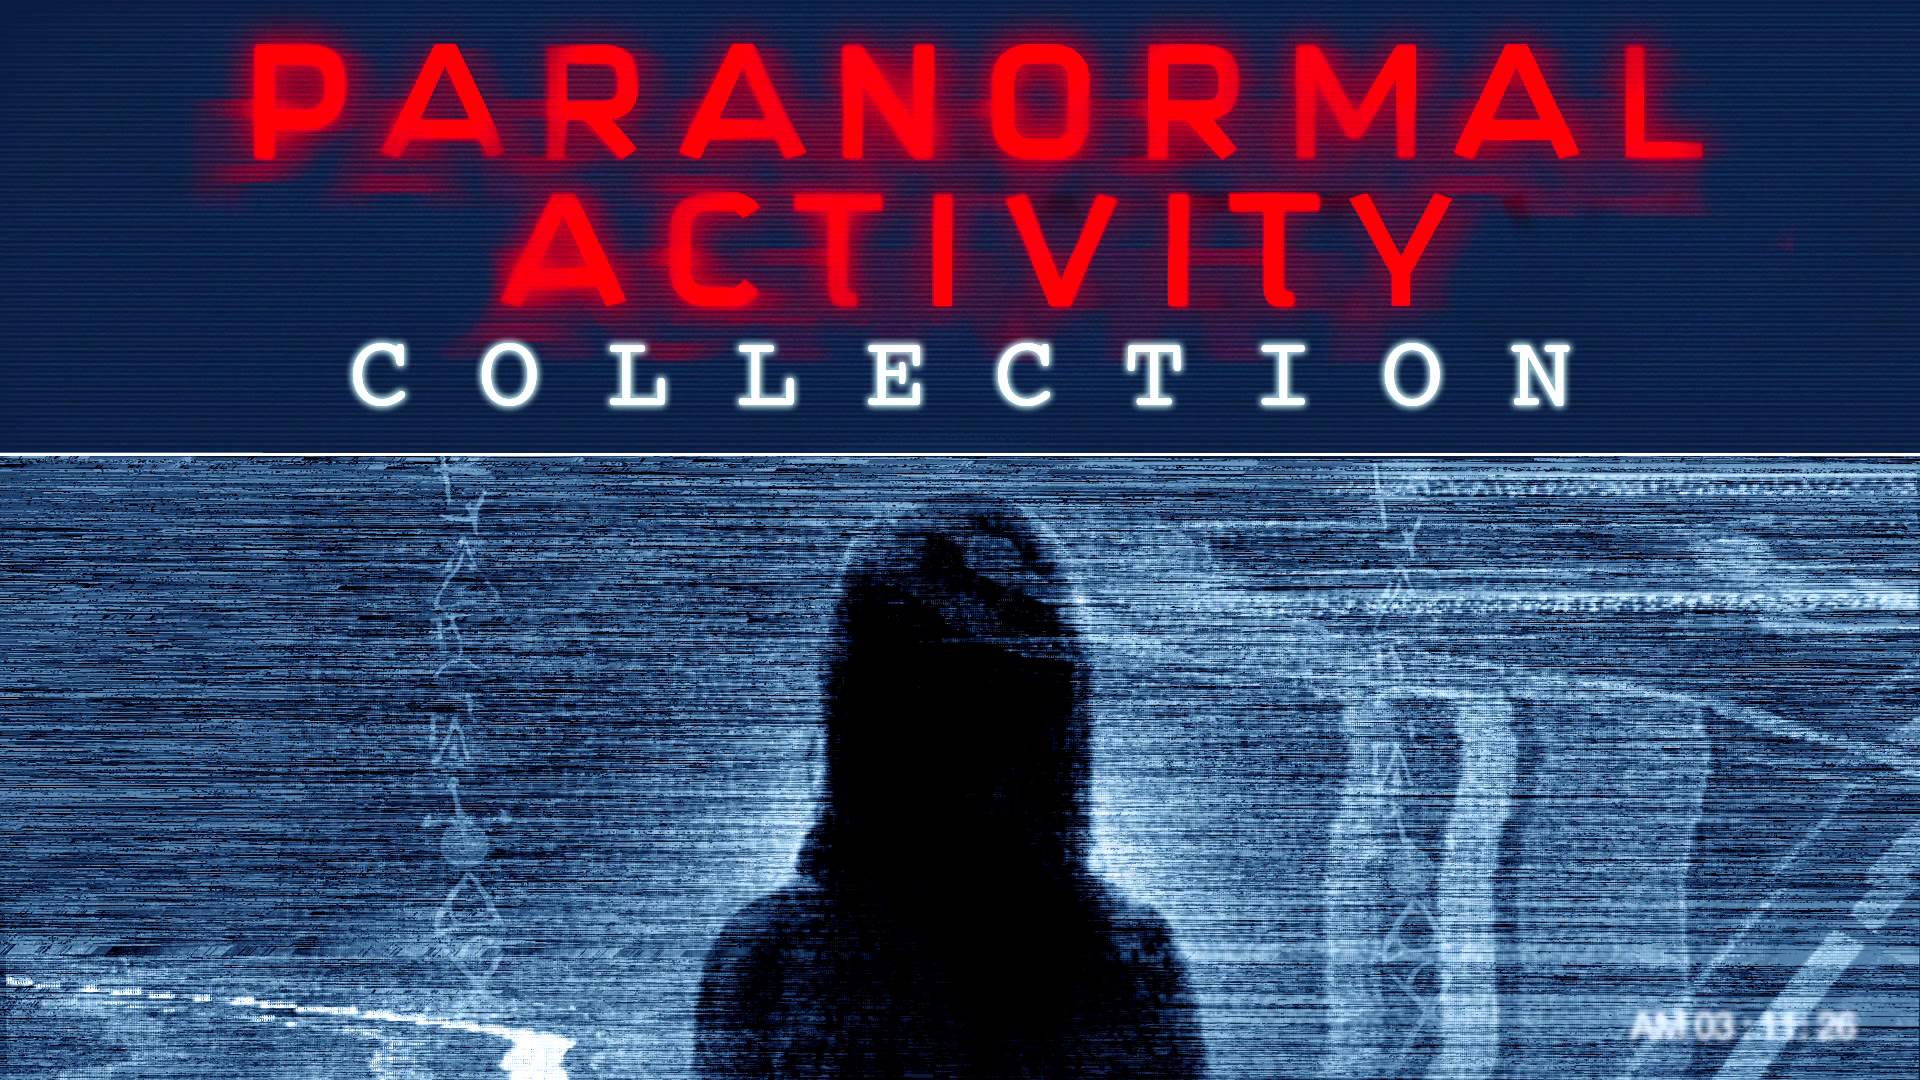 Paranormal Activity Collection on Google Play